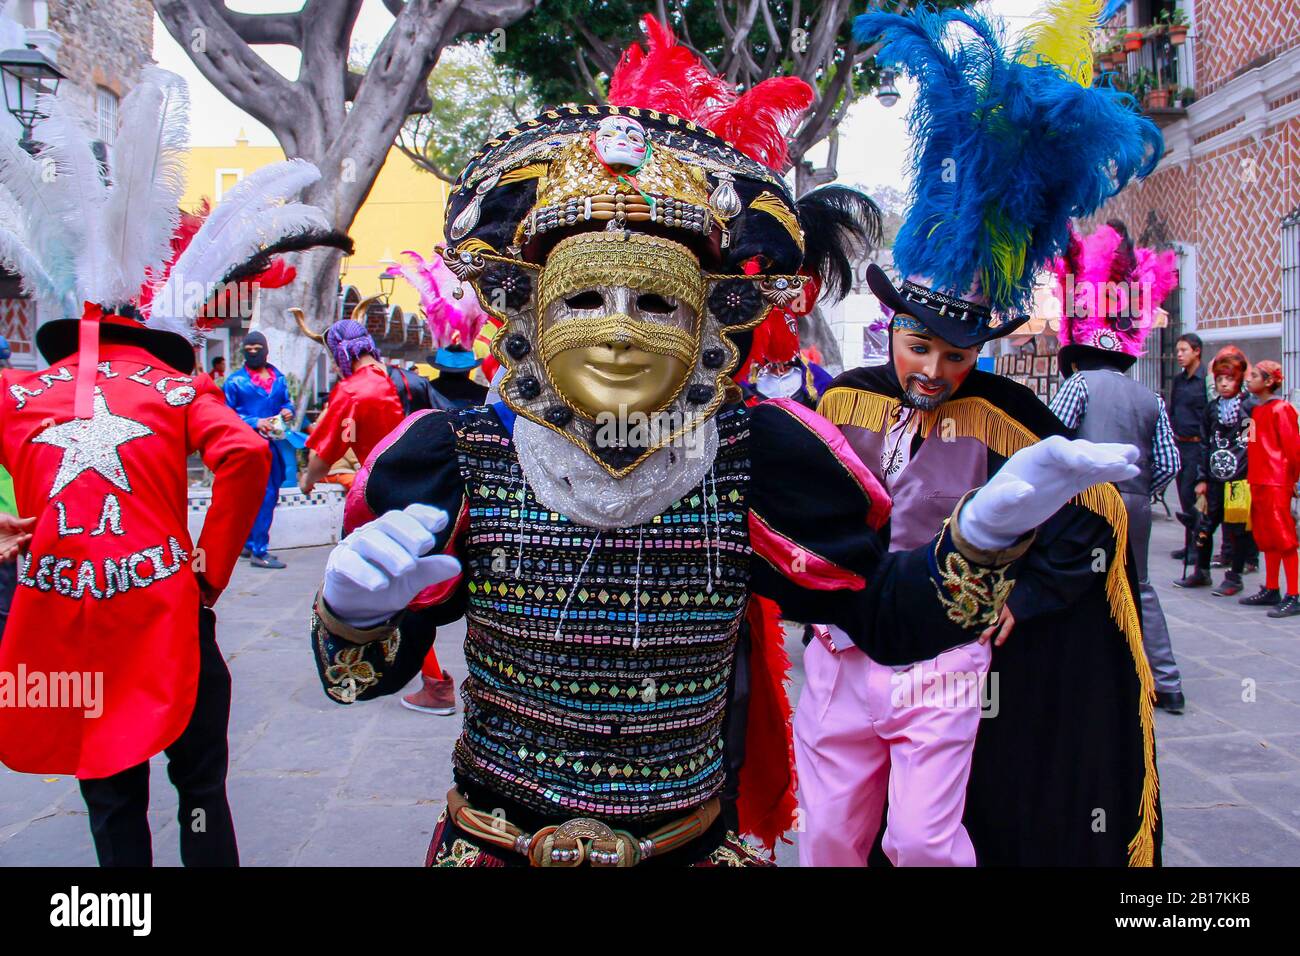 Huehues Mexico, dancer wearing a traditional mexican folk costume and mask rich in color. Carnival scene. Mexican Carnival Stock Photo